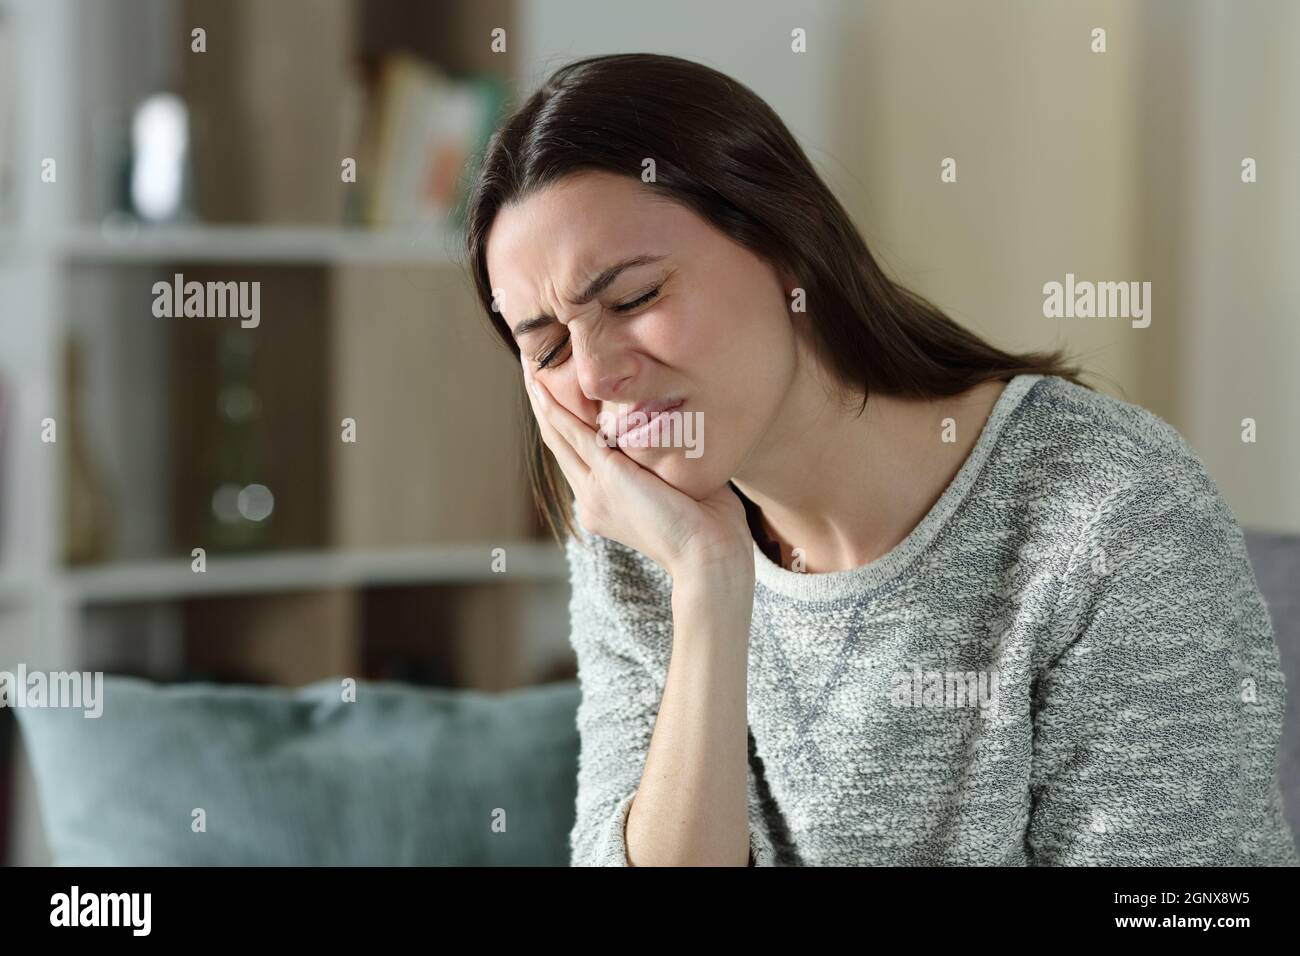 Stressed woman complaining suffering toothache sitting on a couch at home Stock Photo